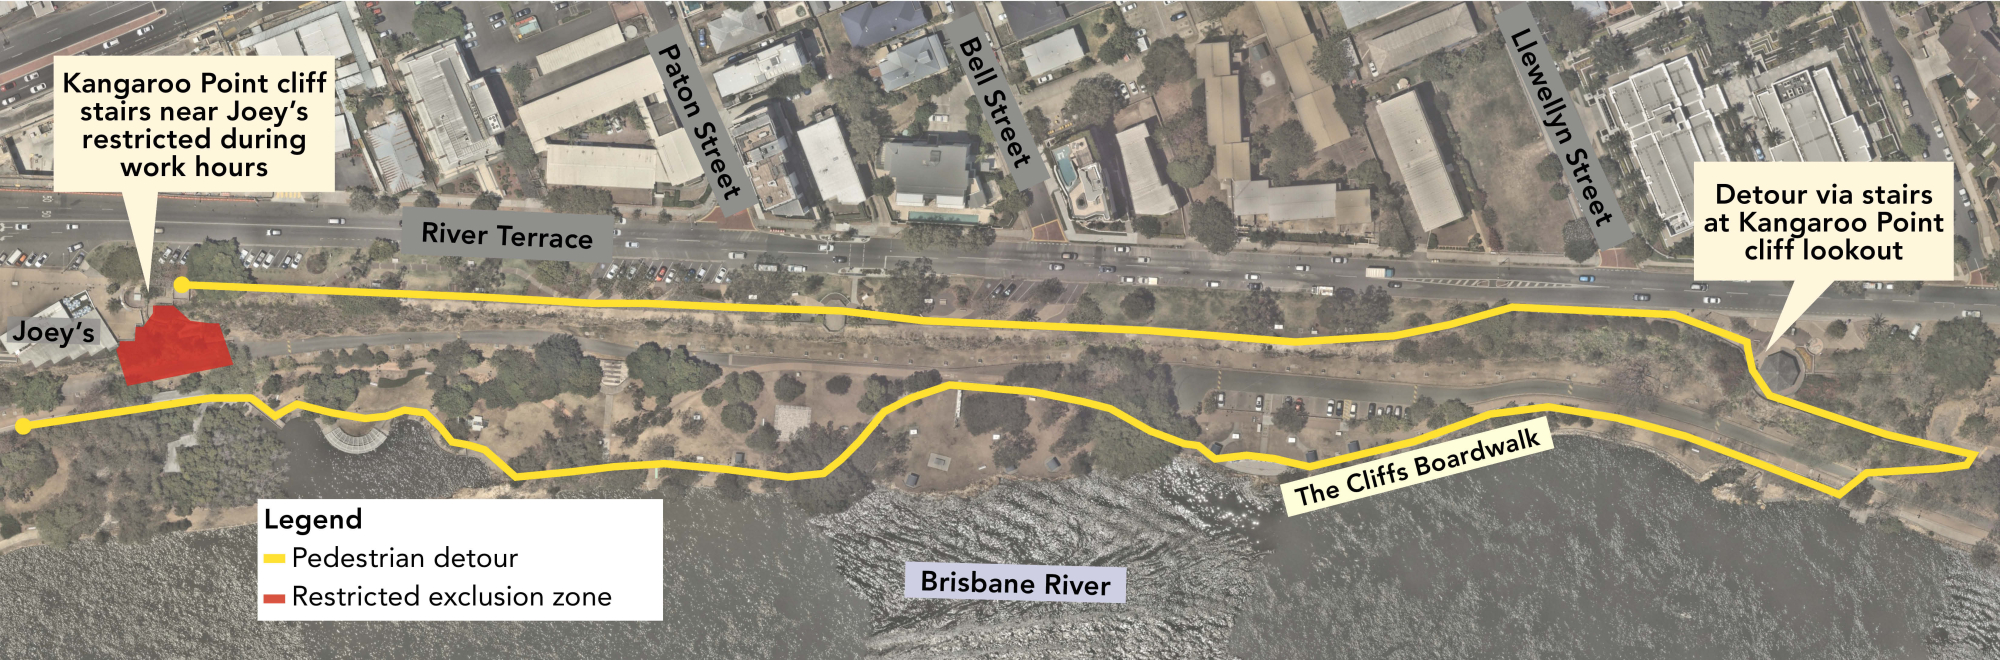 This image shows an aerial view map of the Kangaroo Point cliff stairs detour